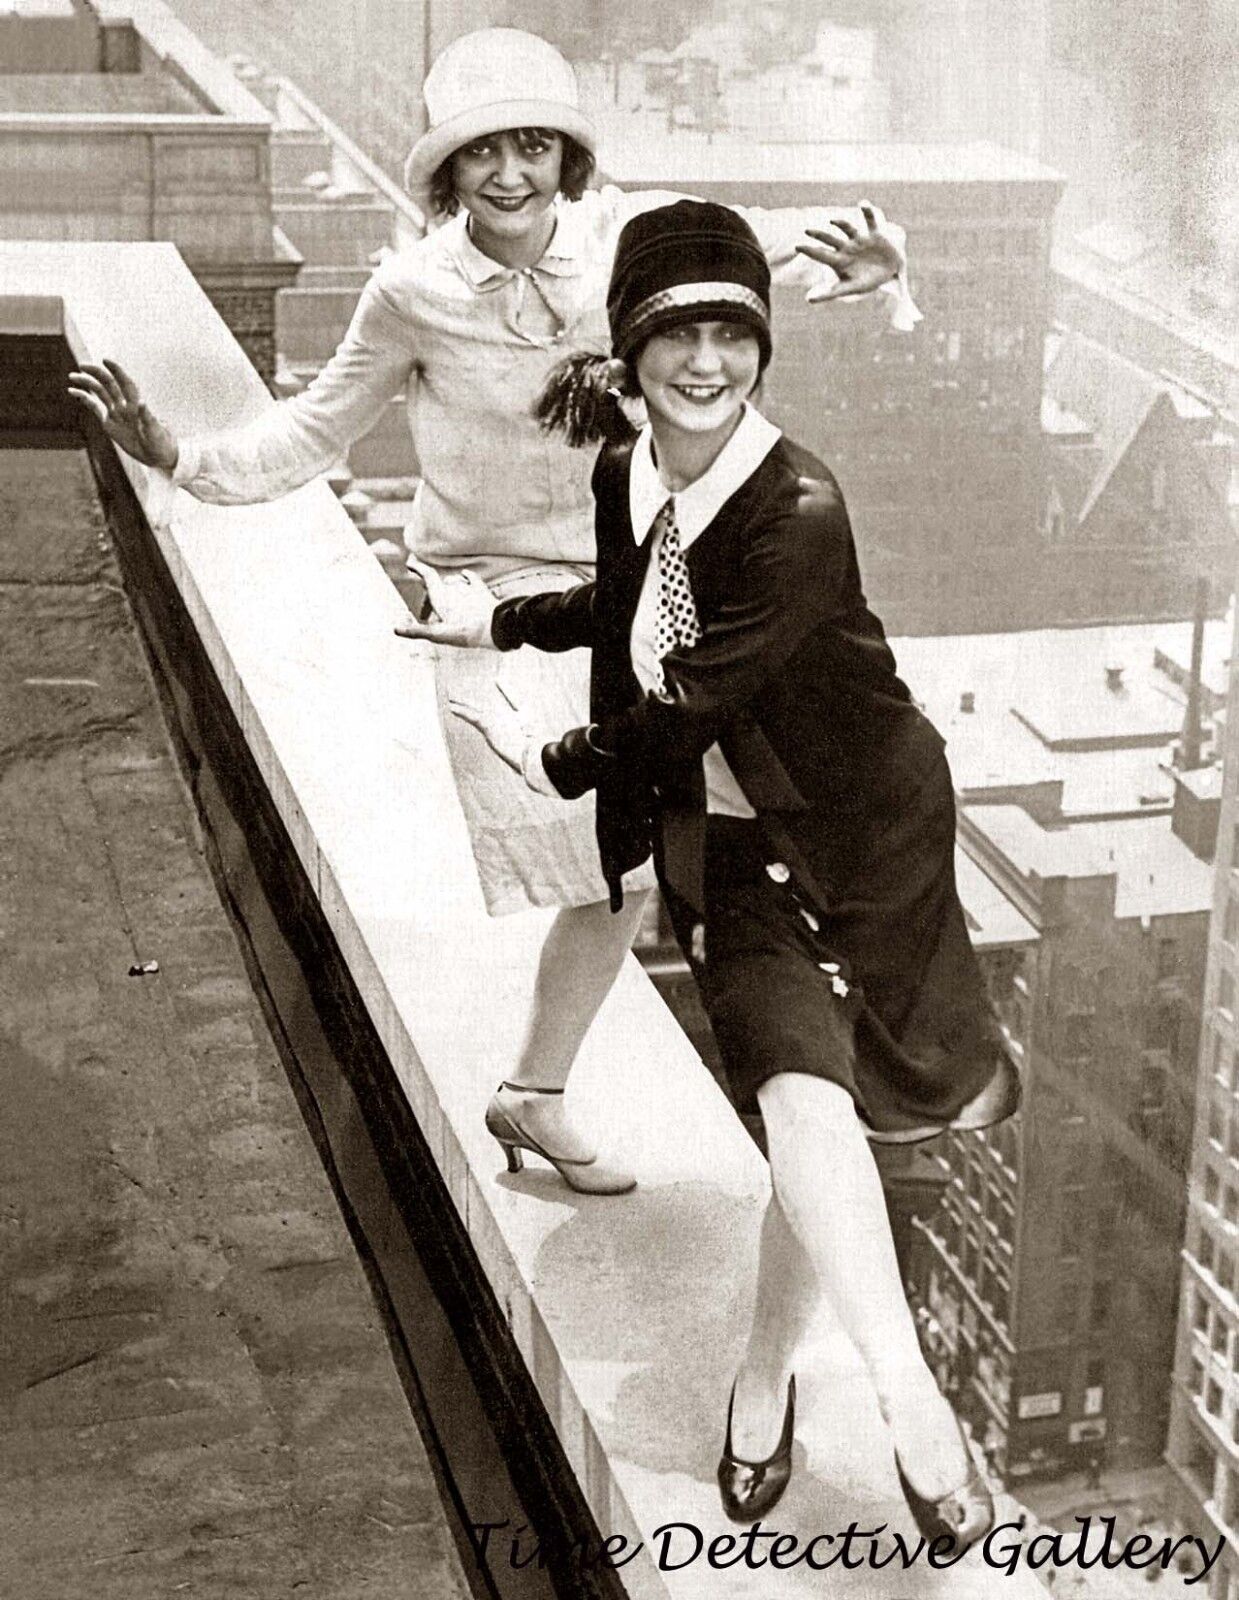 Roaring 20s Flappers Dancing on Rooftop - 1920s - Historic Photo Print